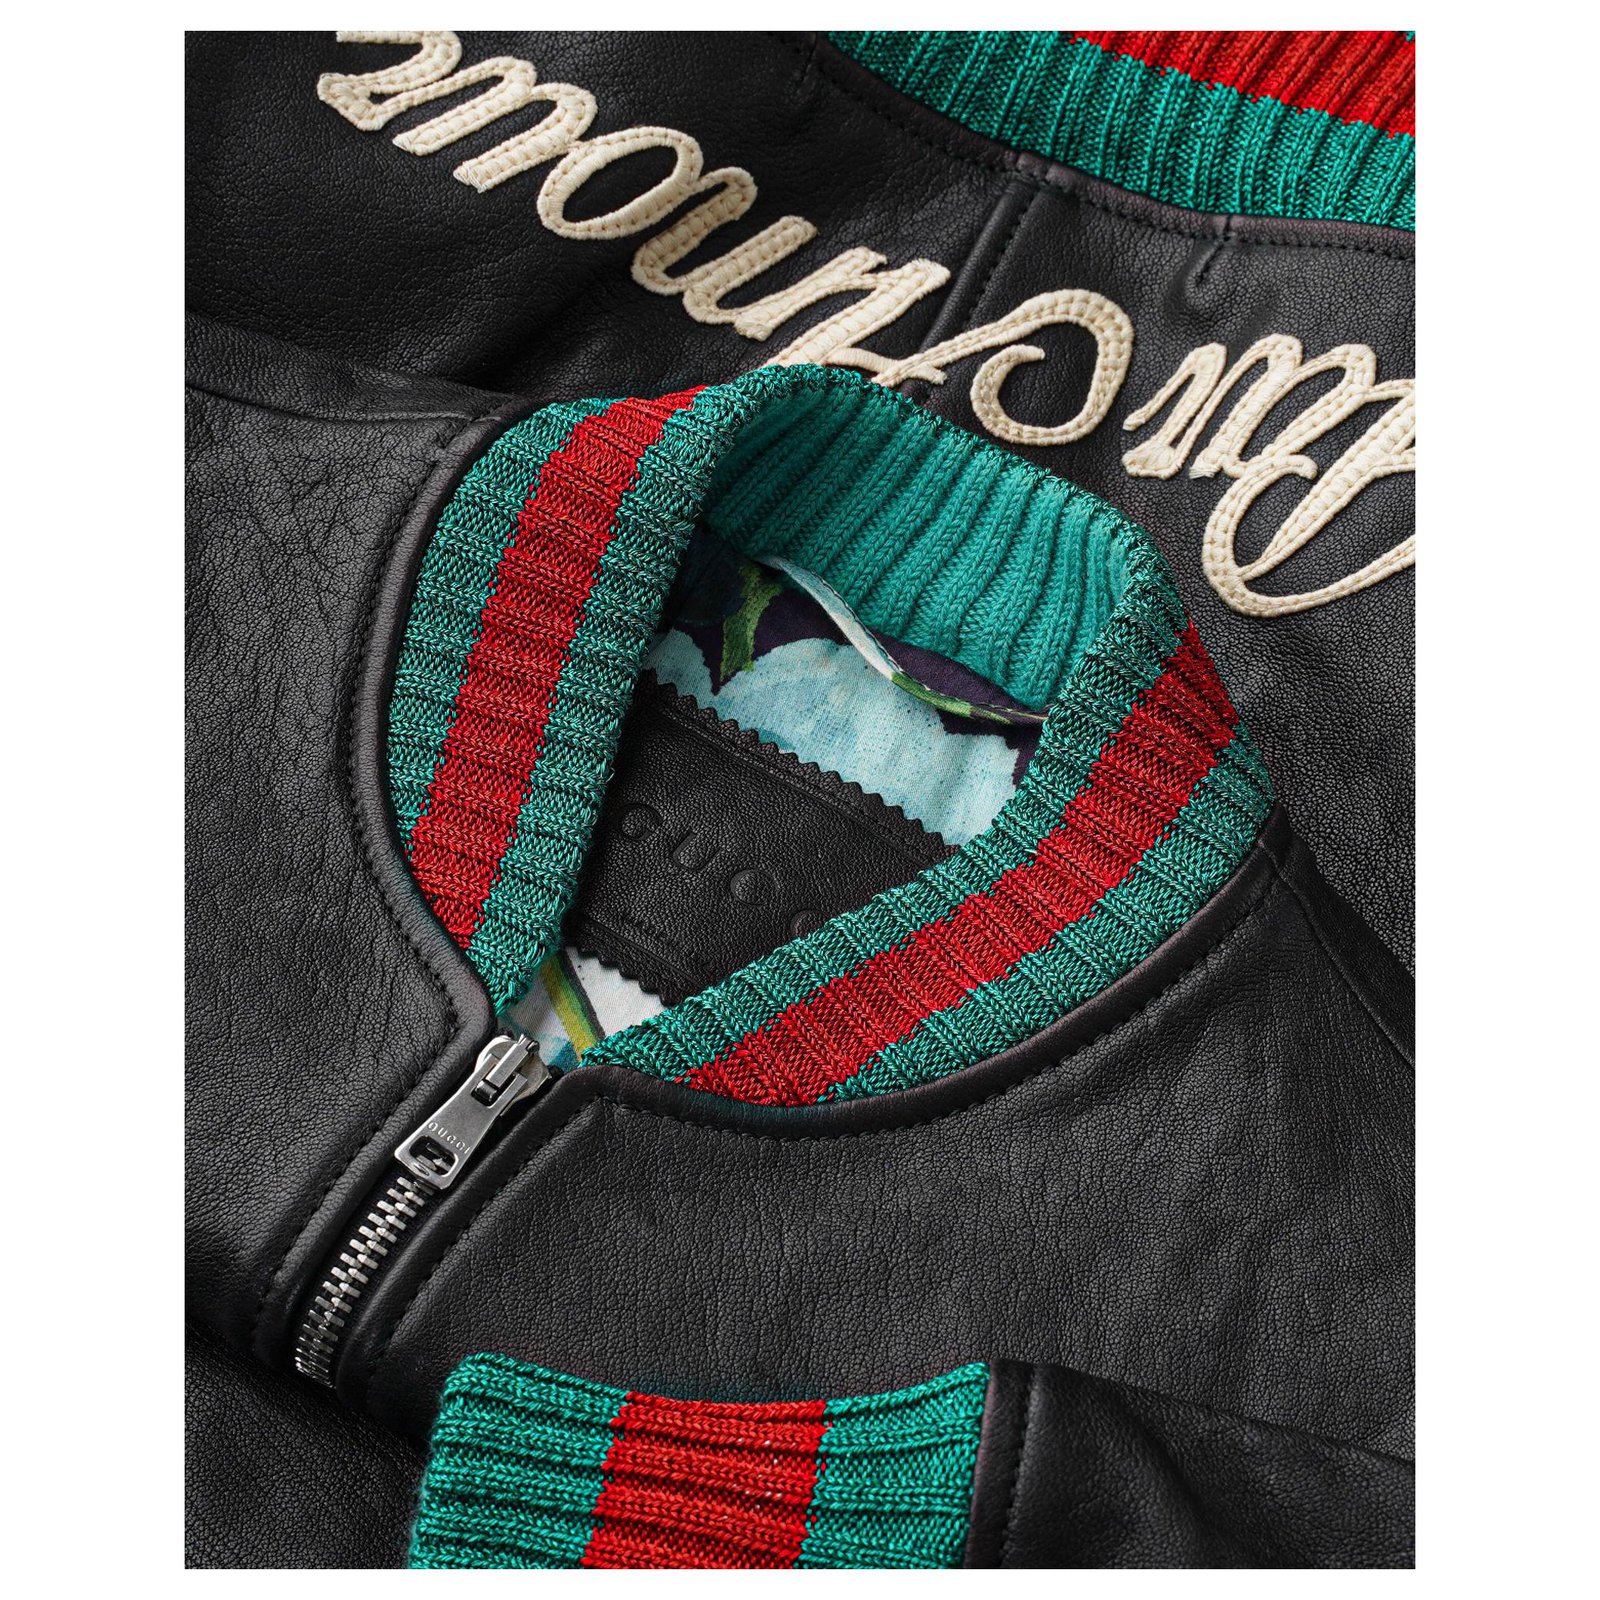 Gucci Black Tiger Head Embroidered Leather Bomber Jacket – Savonches